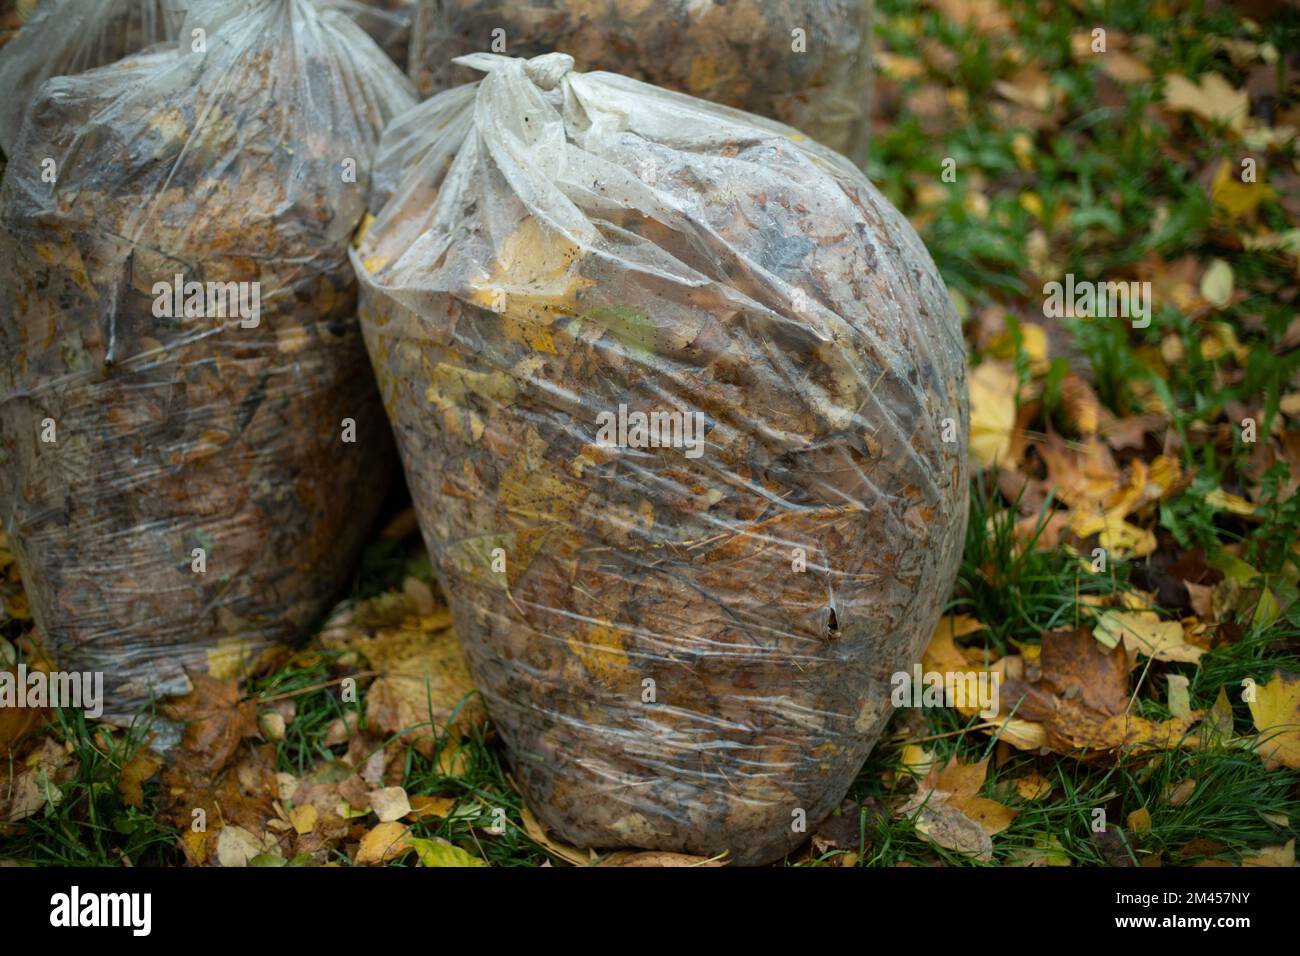 https://c8.alamy.com/comp/2M457NY/bags-of-leaves-transparent-bag-with-foliage-cleaning-in-yard-in-autumn-plastic-garbage-bags-2M457NY.jpg